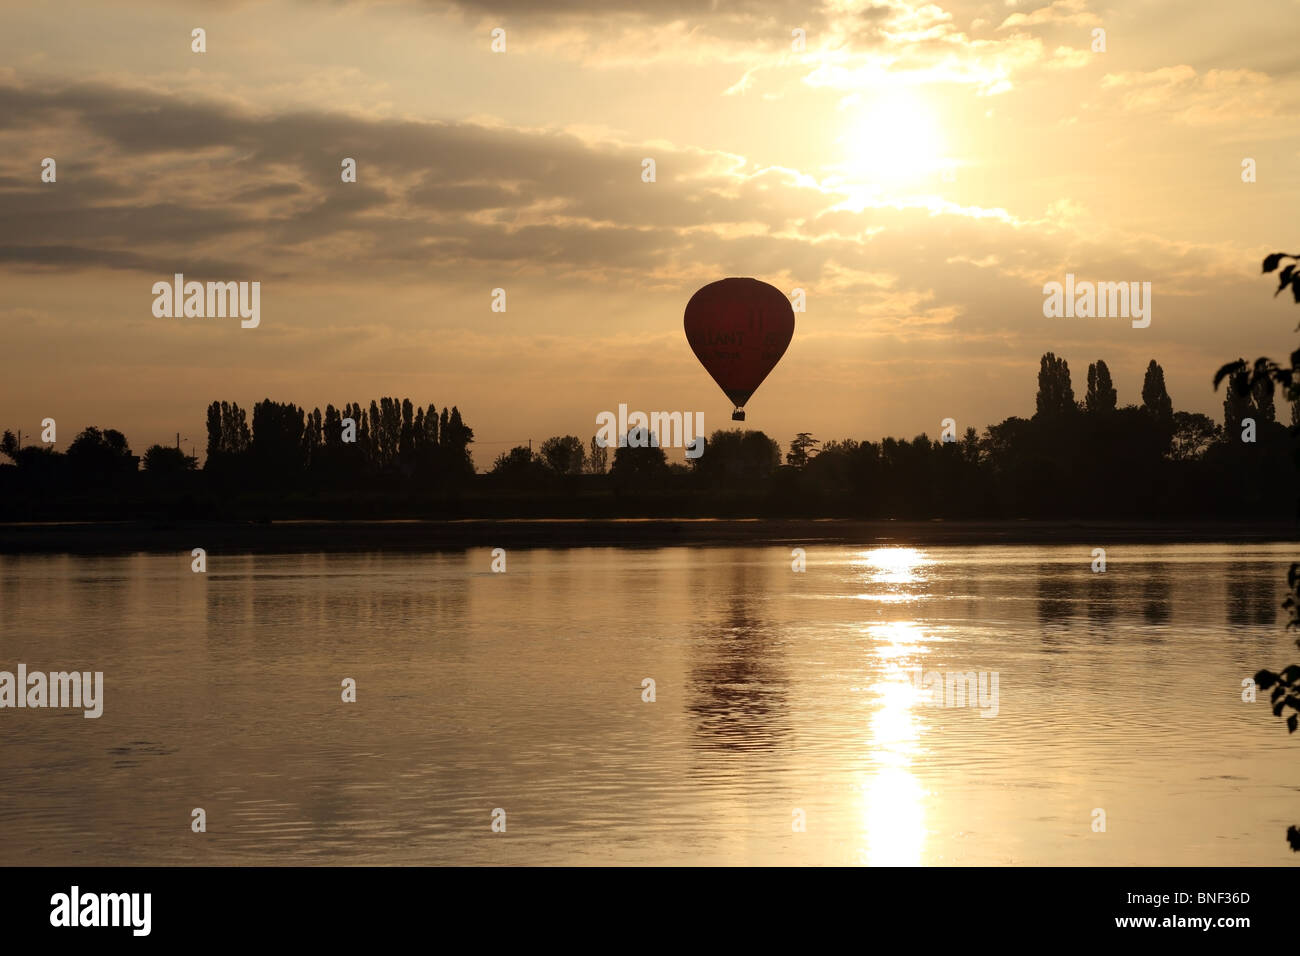 Hot Air Balloon Flying Over the Town of Les Rosiers Sur Loire Just After Sunrise With the Loire River in the Foreground France Stock Photo